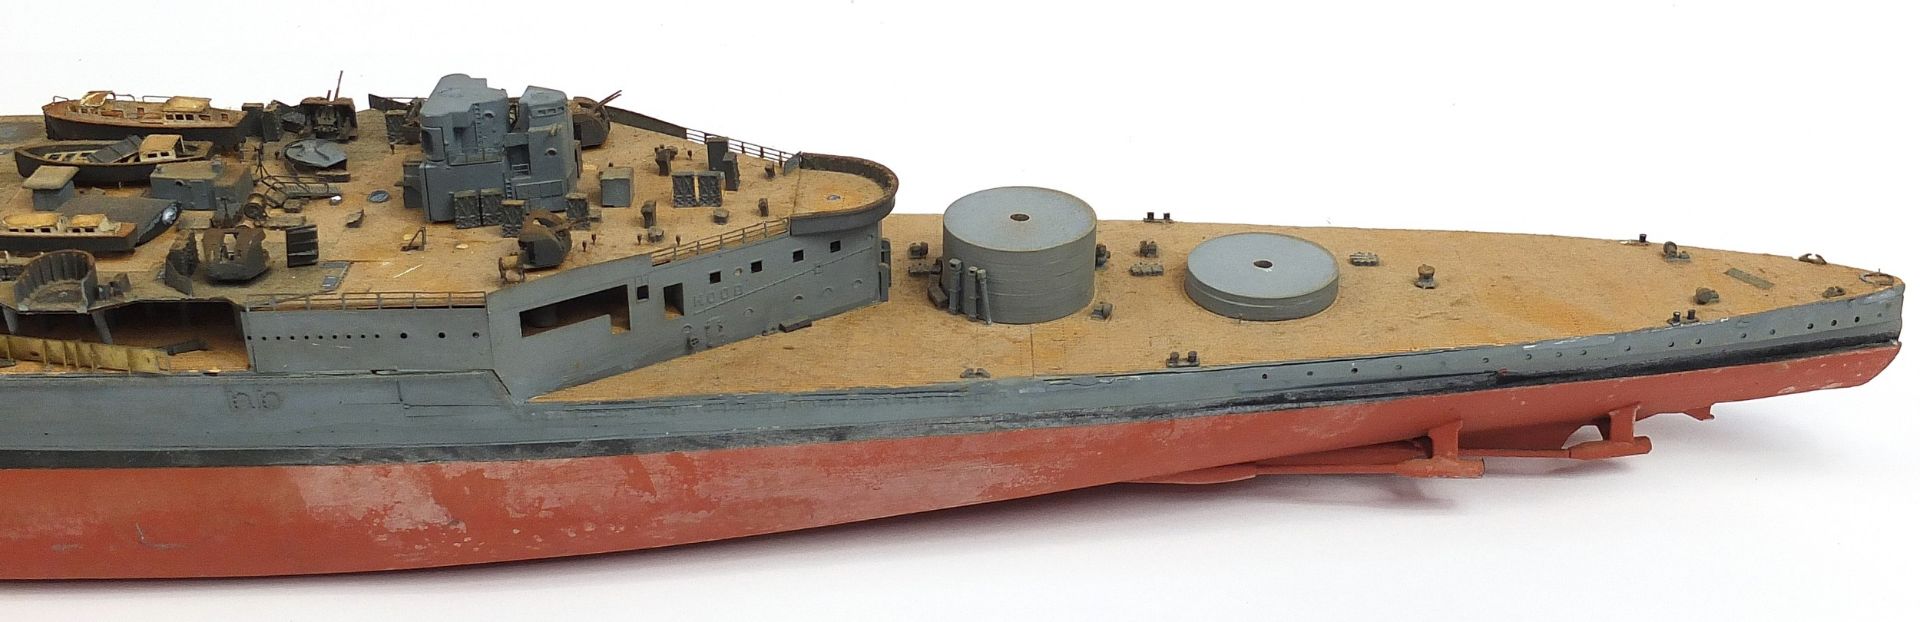 Large military interest model boat, 140cm in length - Image 4 of 5